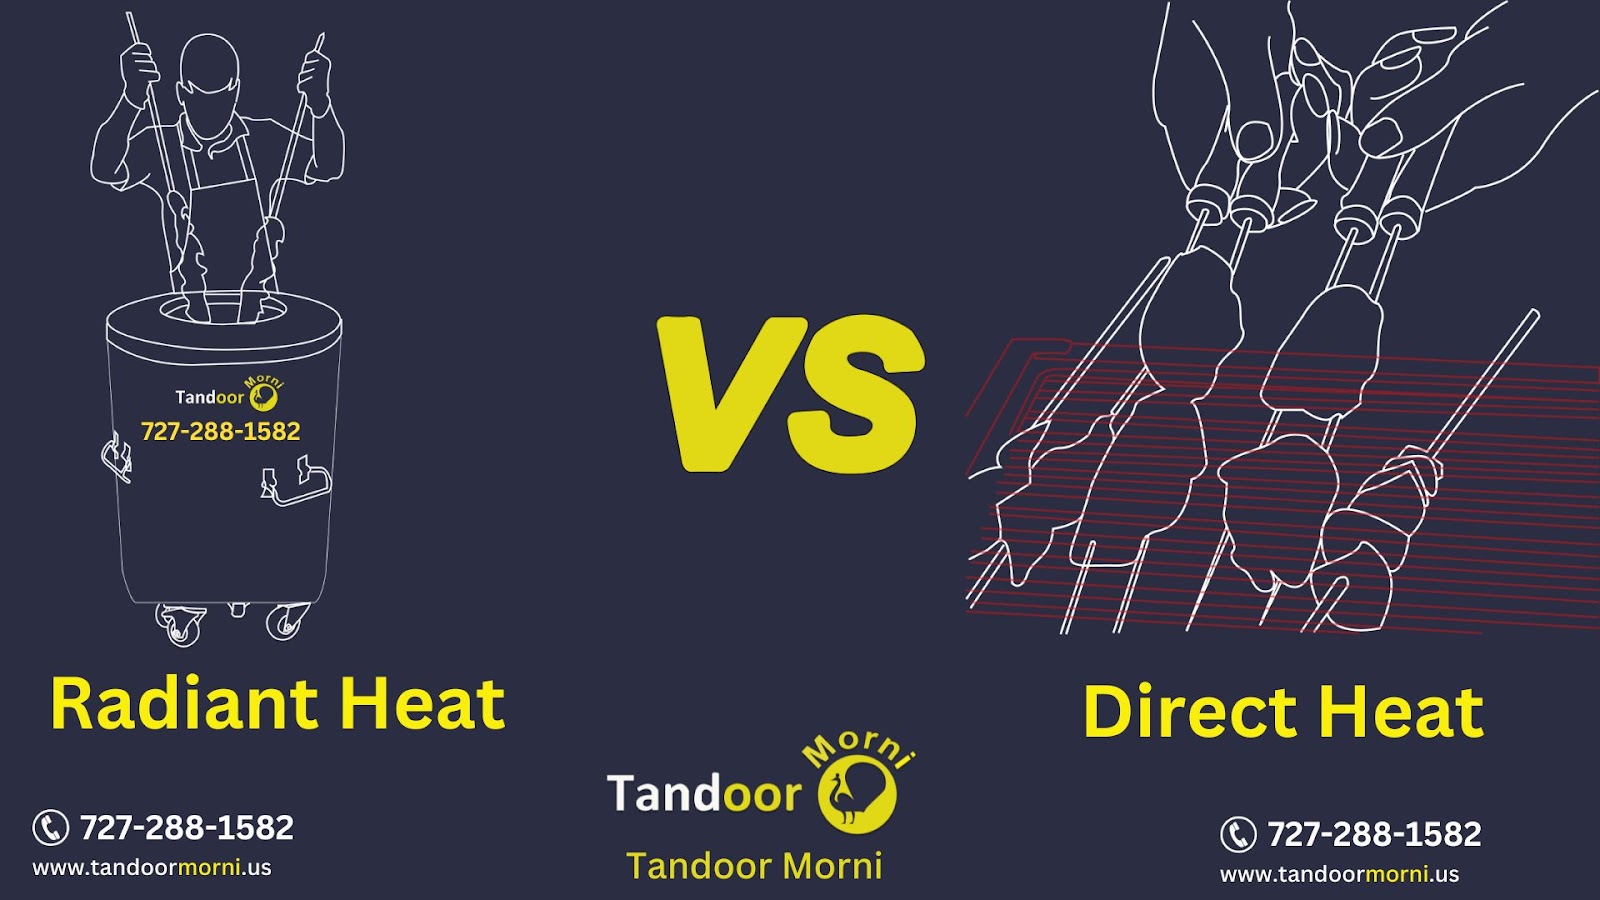 In this image, we see bbq vs tandoor, with radiant heat in the tandoor and direct heat in the barbecue.